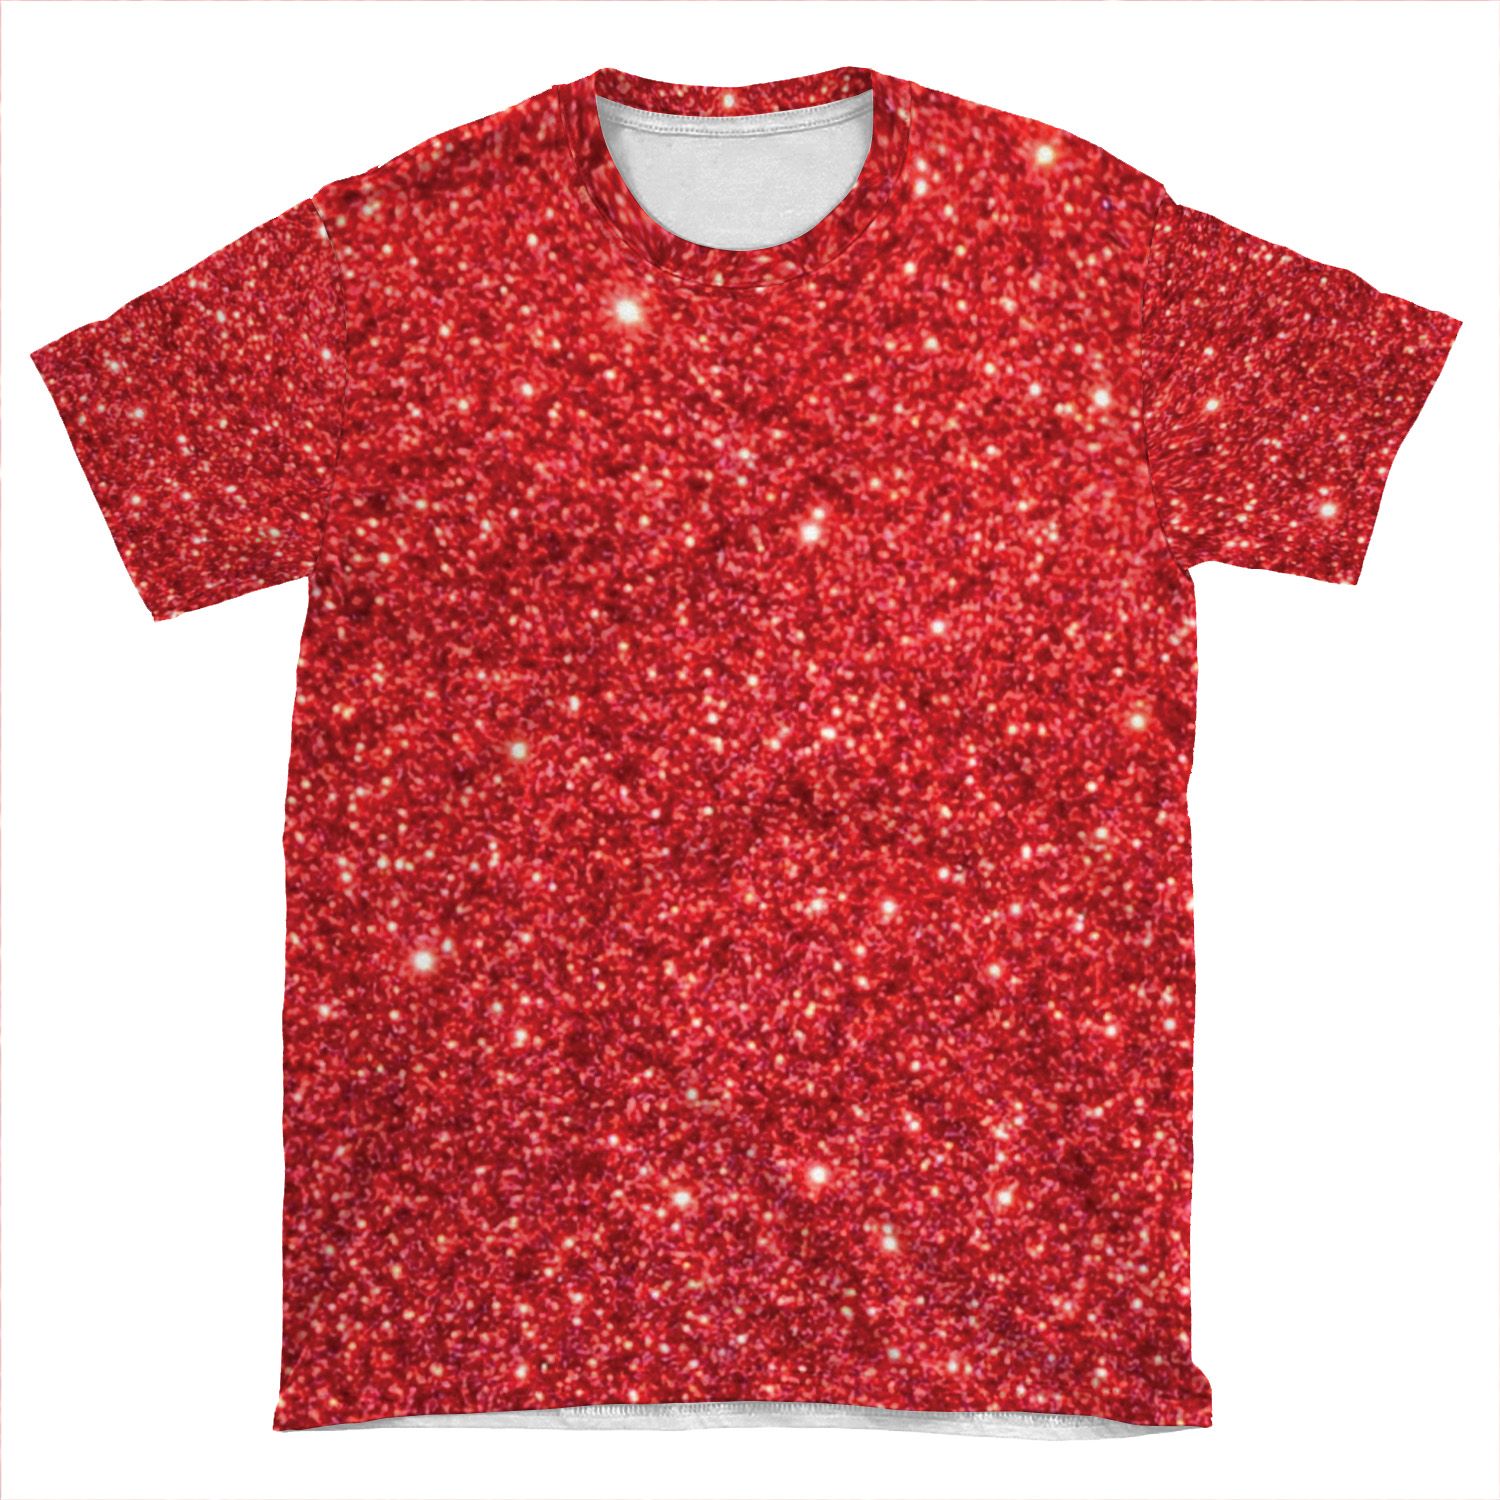 Shiny Sparkly Christmas Cherry Red Glitter AOP T-shirt Tee - Chief T-shirt